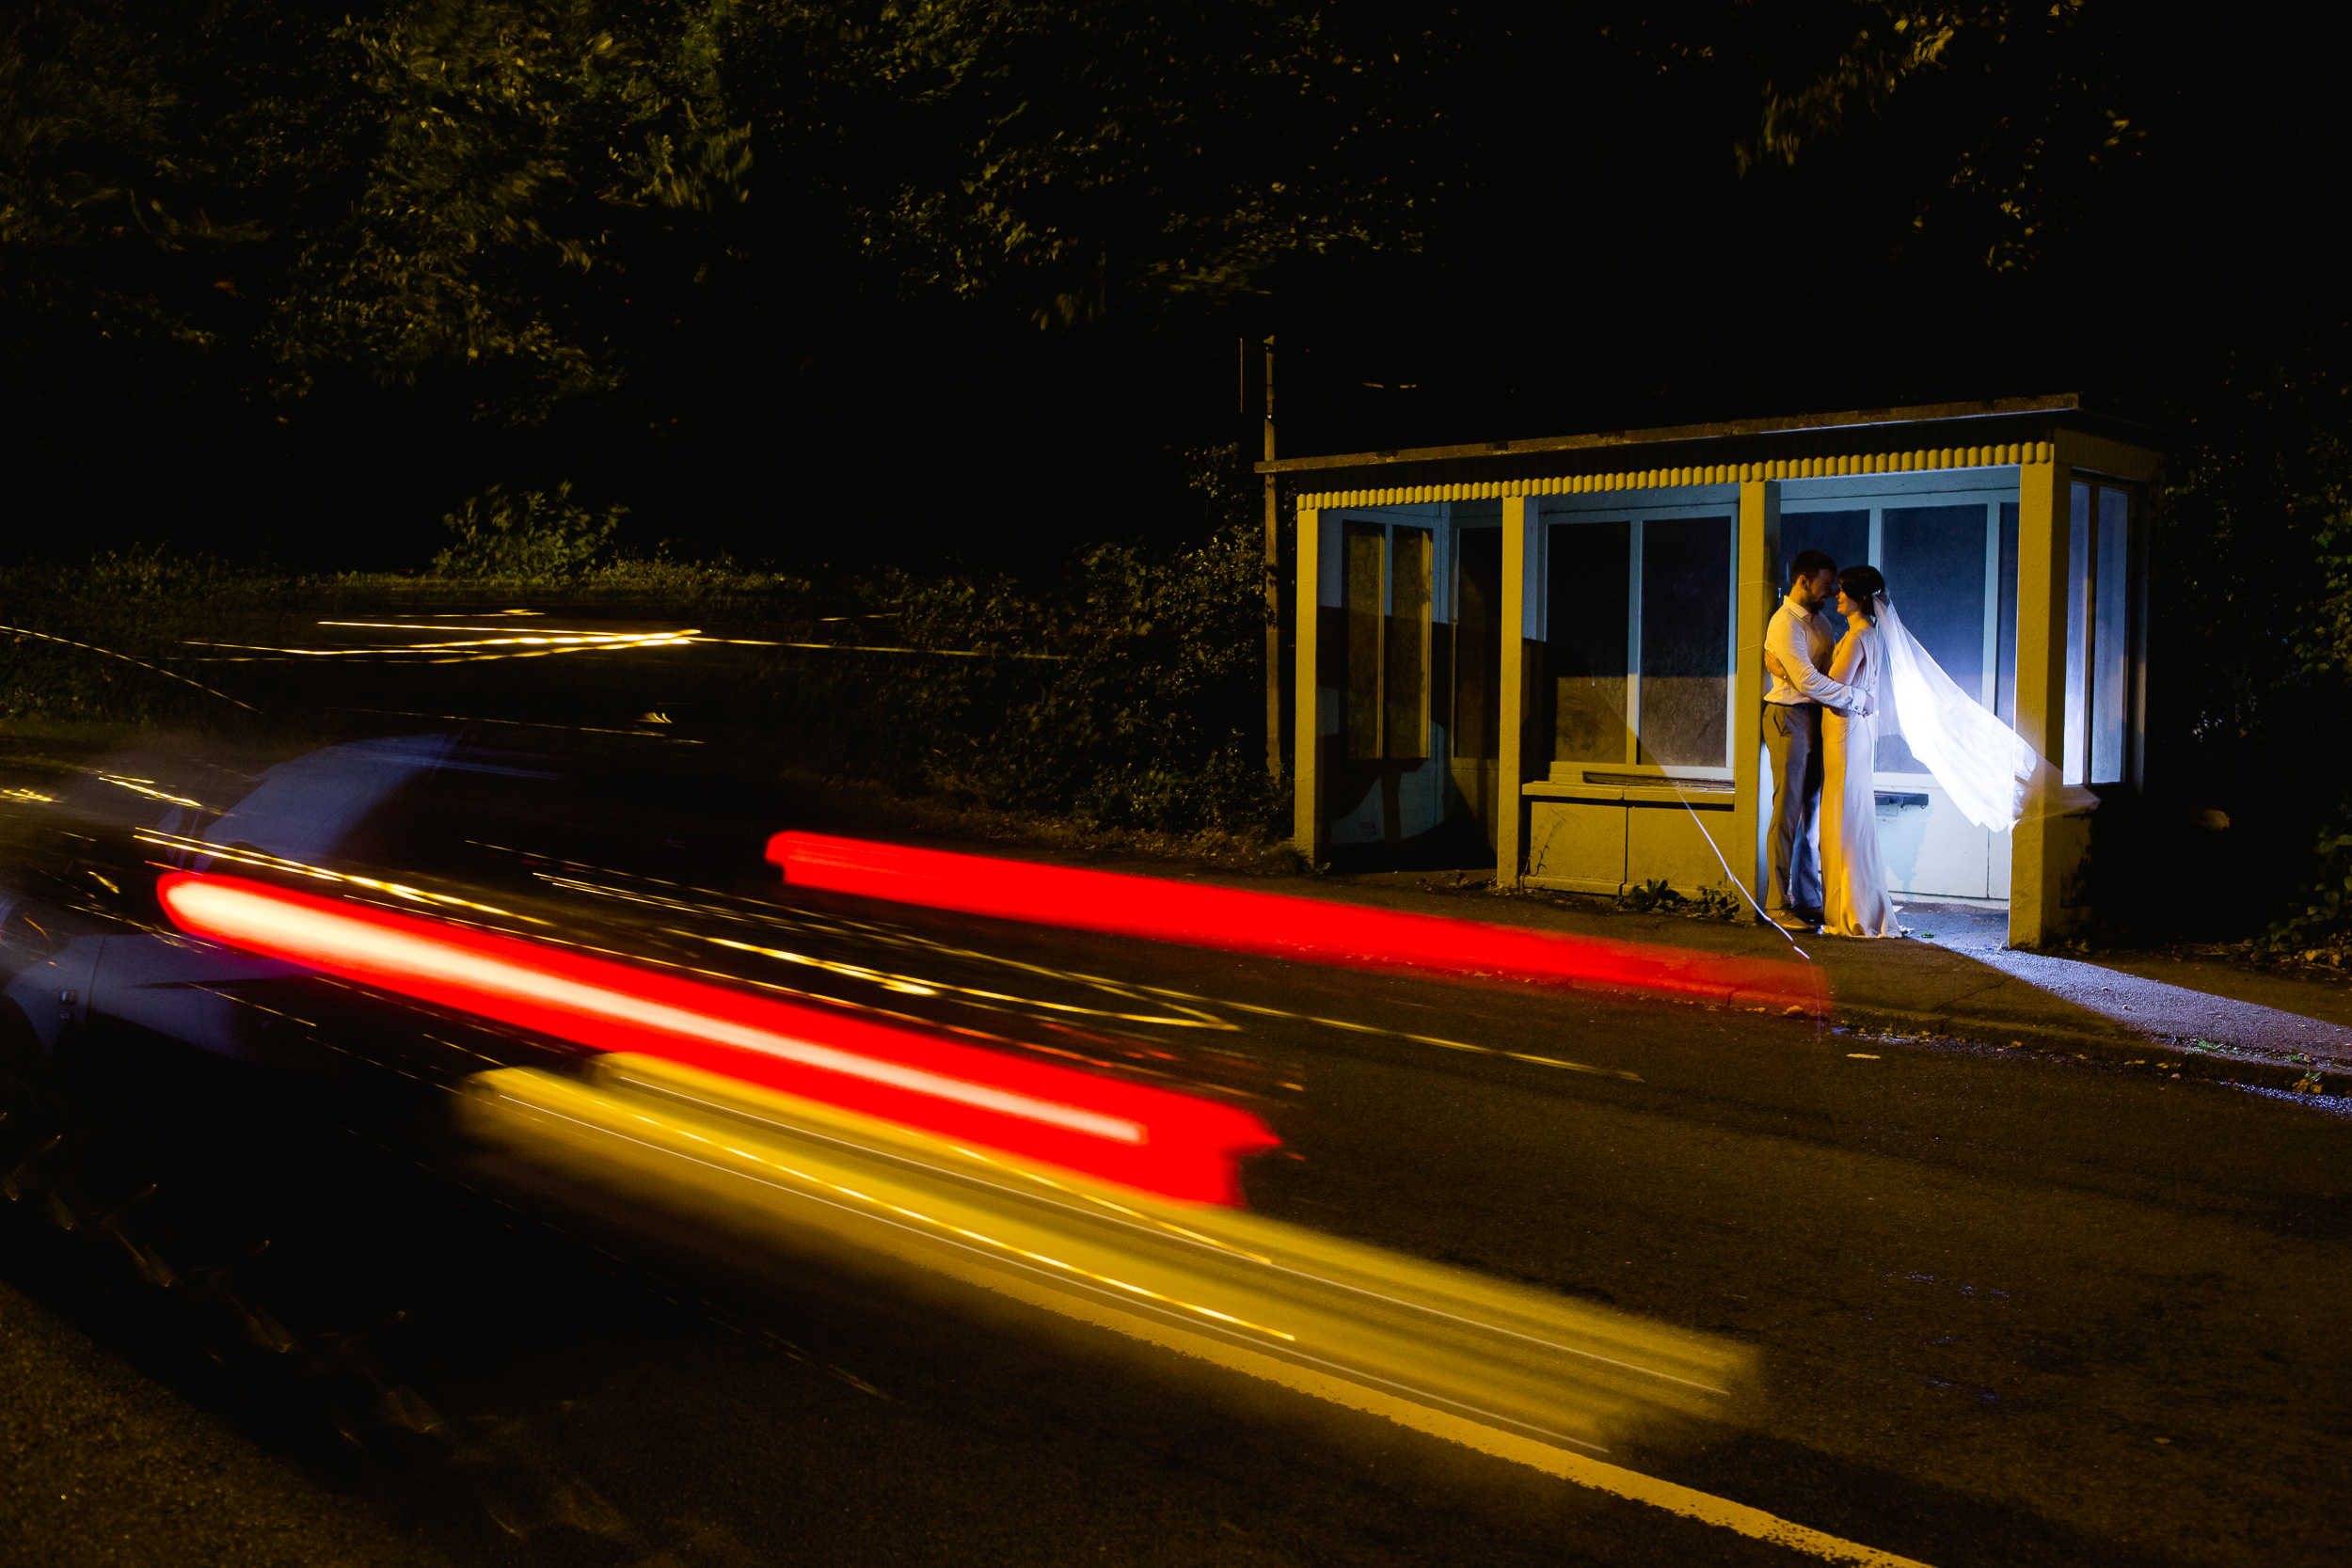 Lickey hills night time pictures - bride and groom in a bus top - Lickey hills wedding 